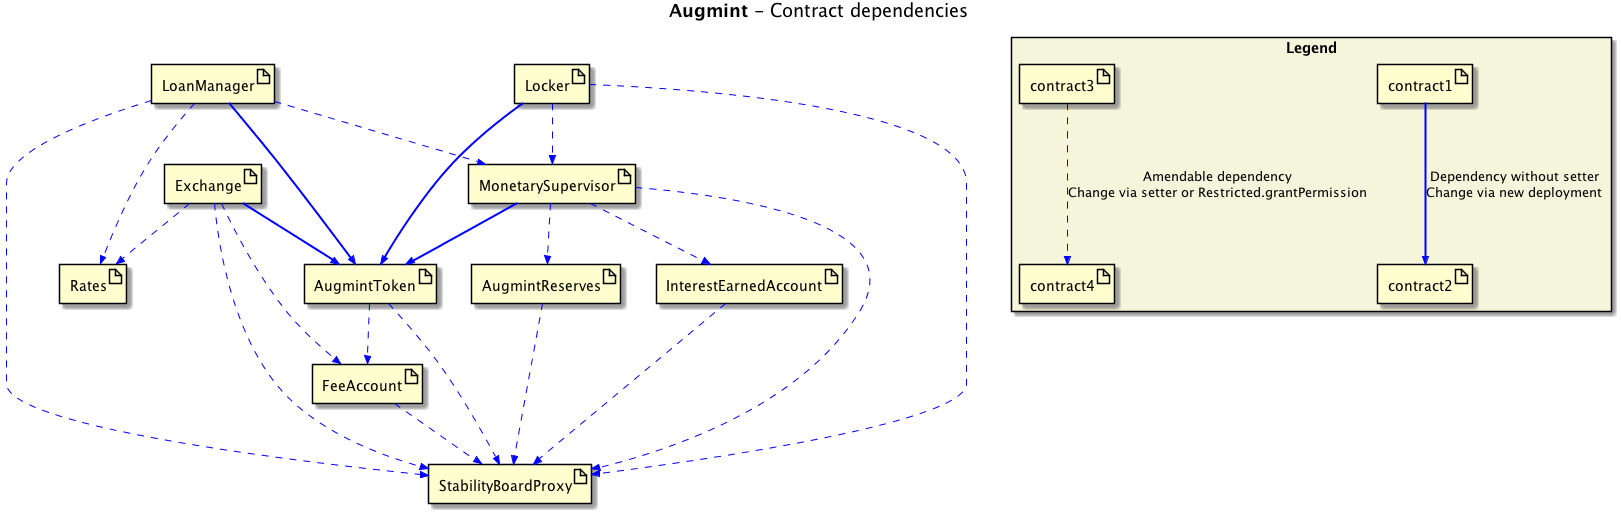 Contract dependency graph